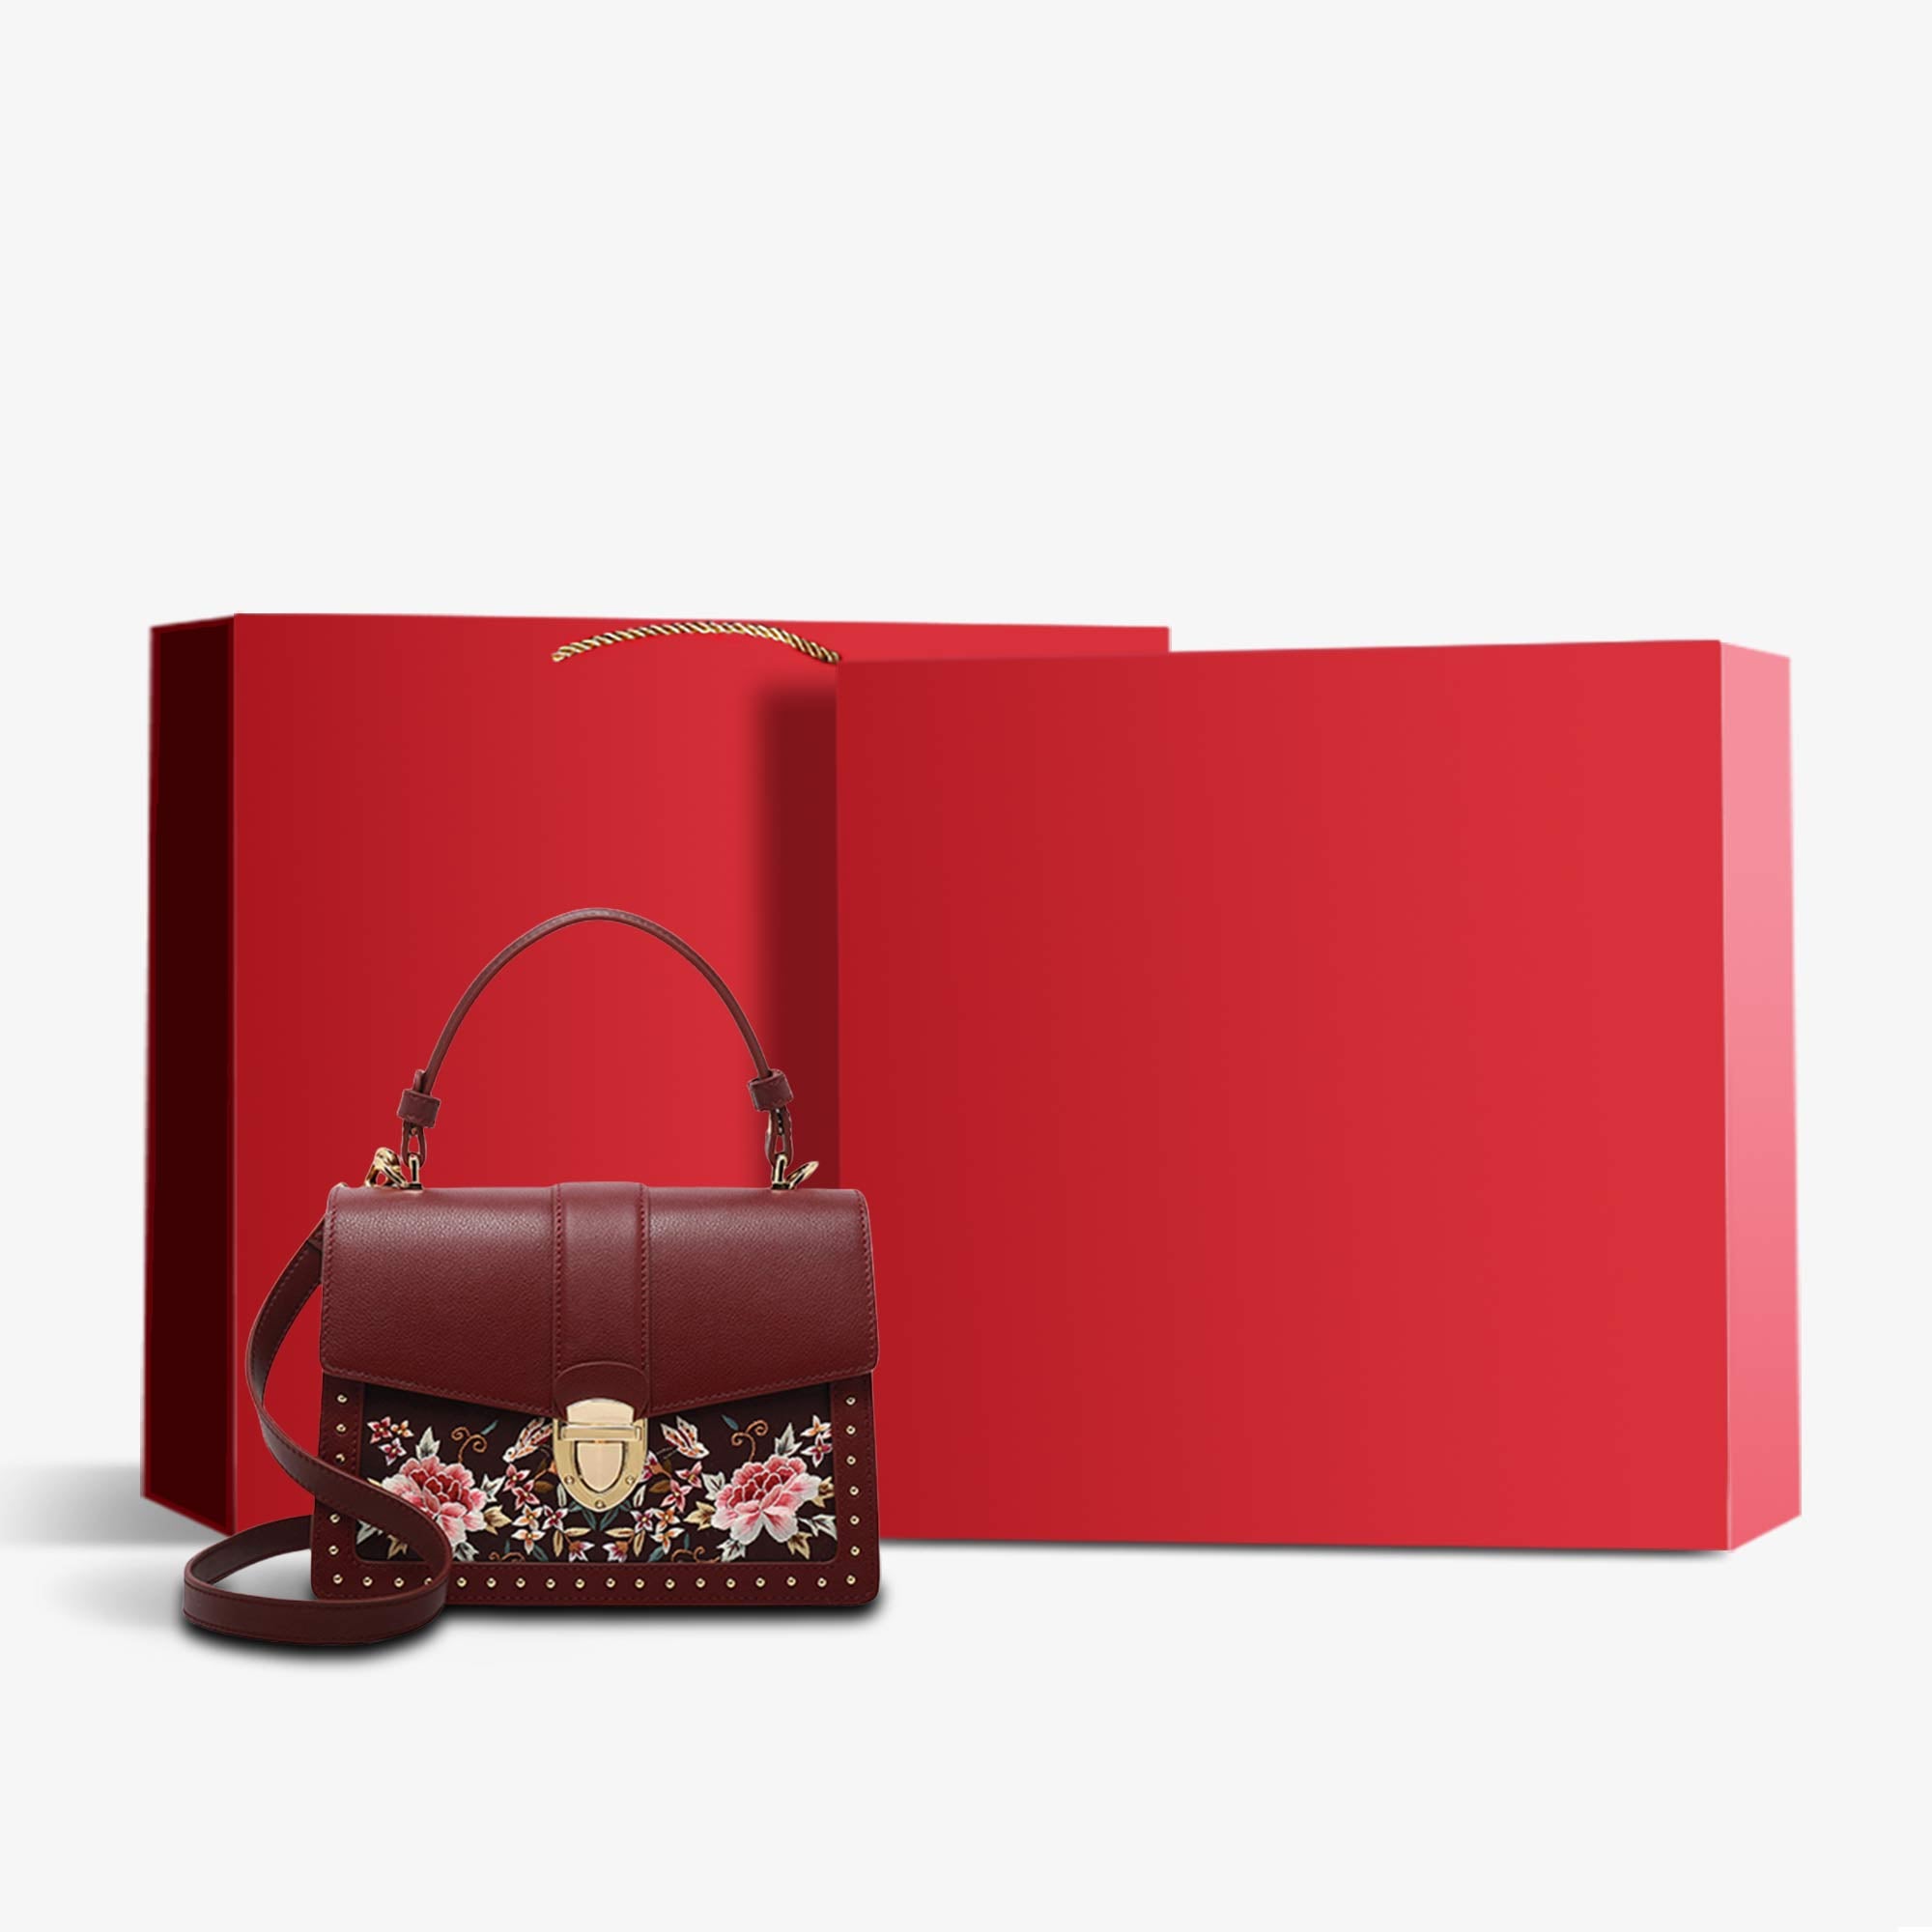 Handcrafted Embroidered Leather Handbag Red Peony-Shoulder Bag-SinoCultural-Maroon-Bag with Gift Box-BXL06WCS206A01-g-SinoCultural